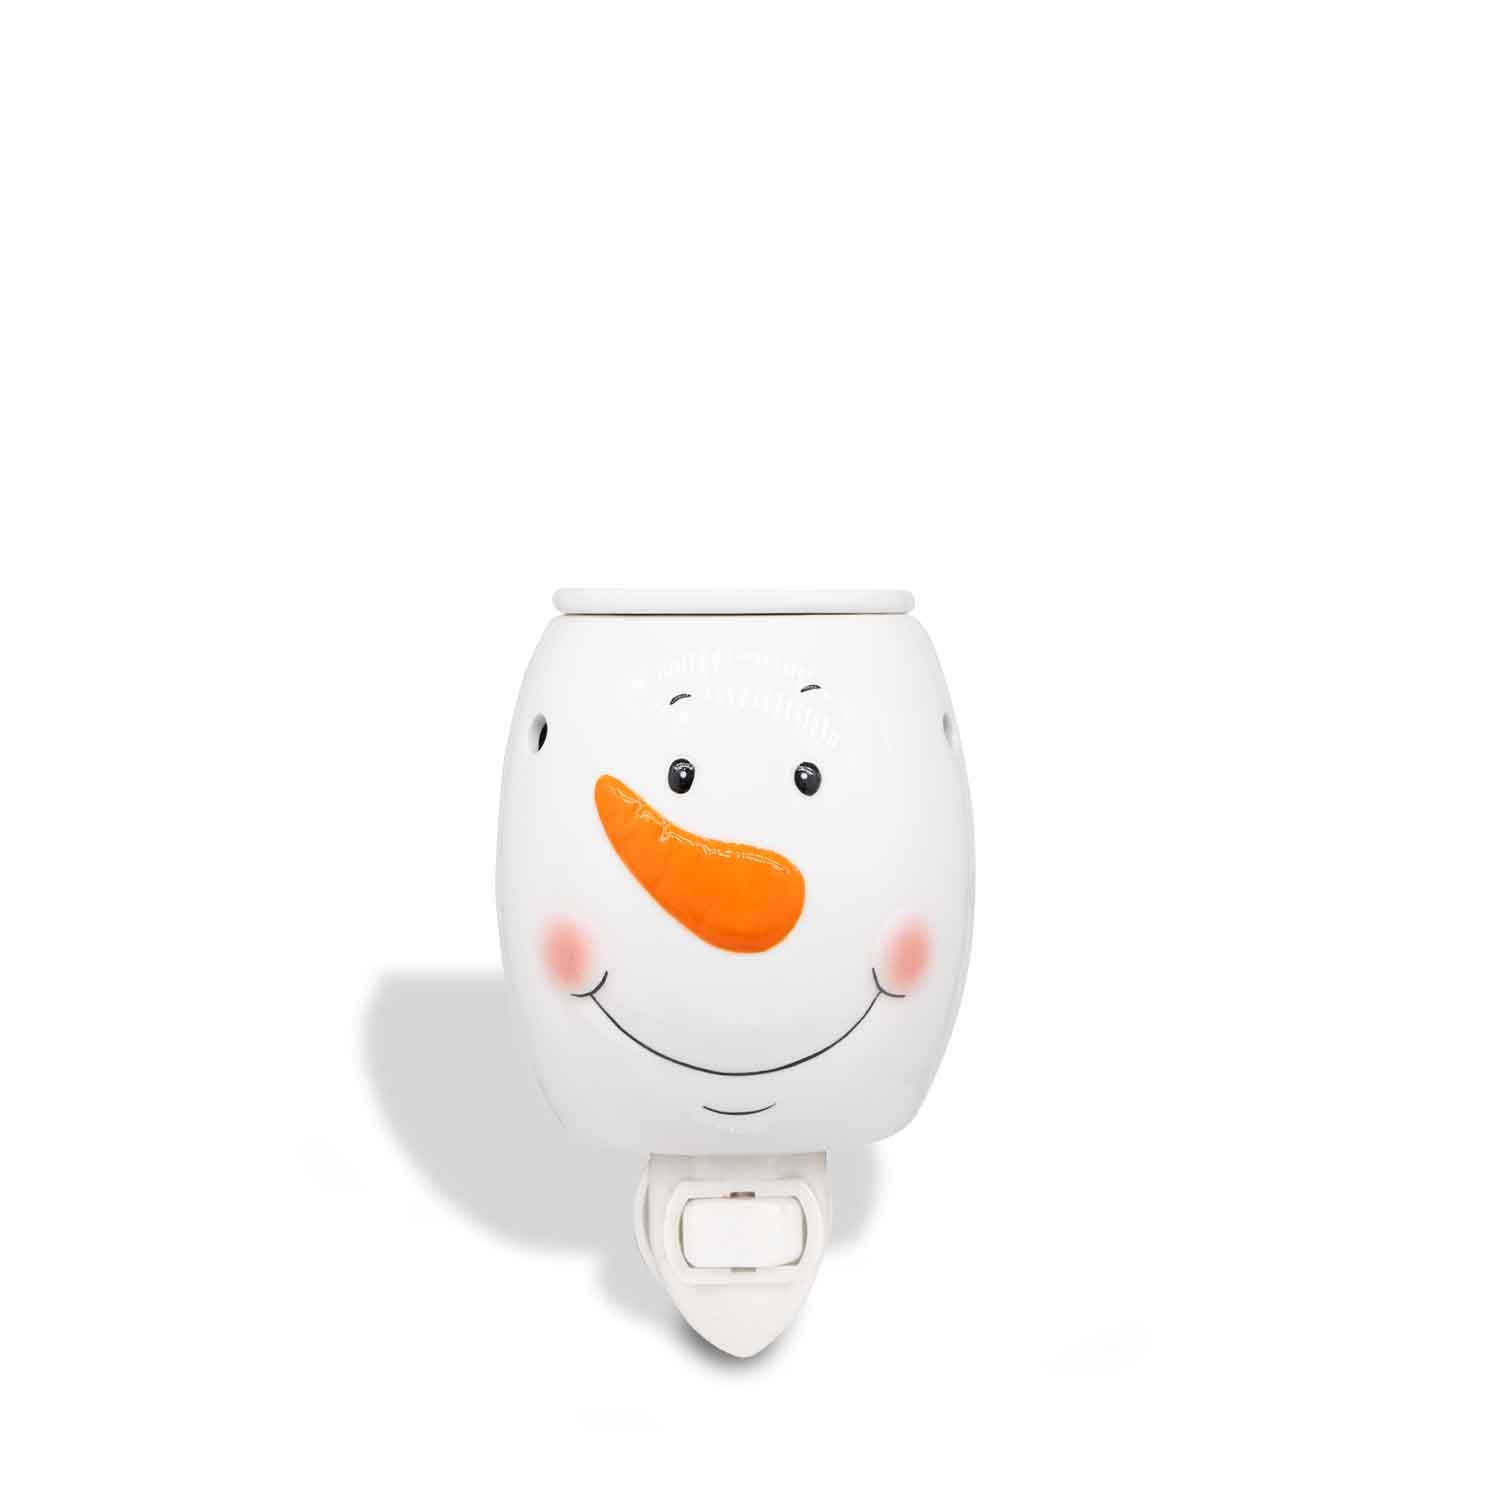 A Snowman Outlet Wax Melt Warmer by Tuscany Candle, shaped night light on a white background.